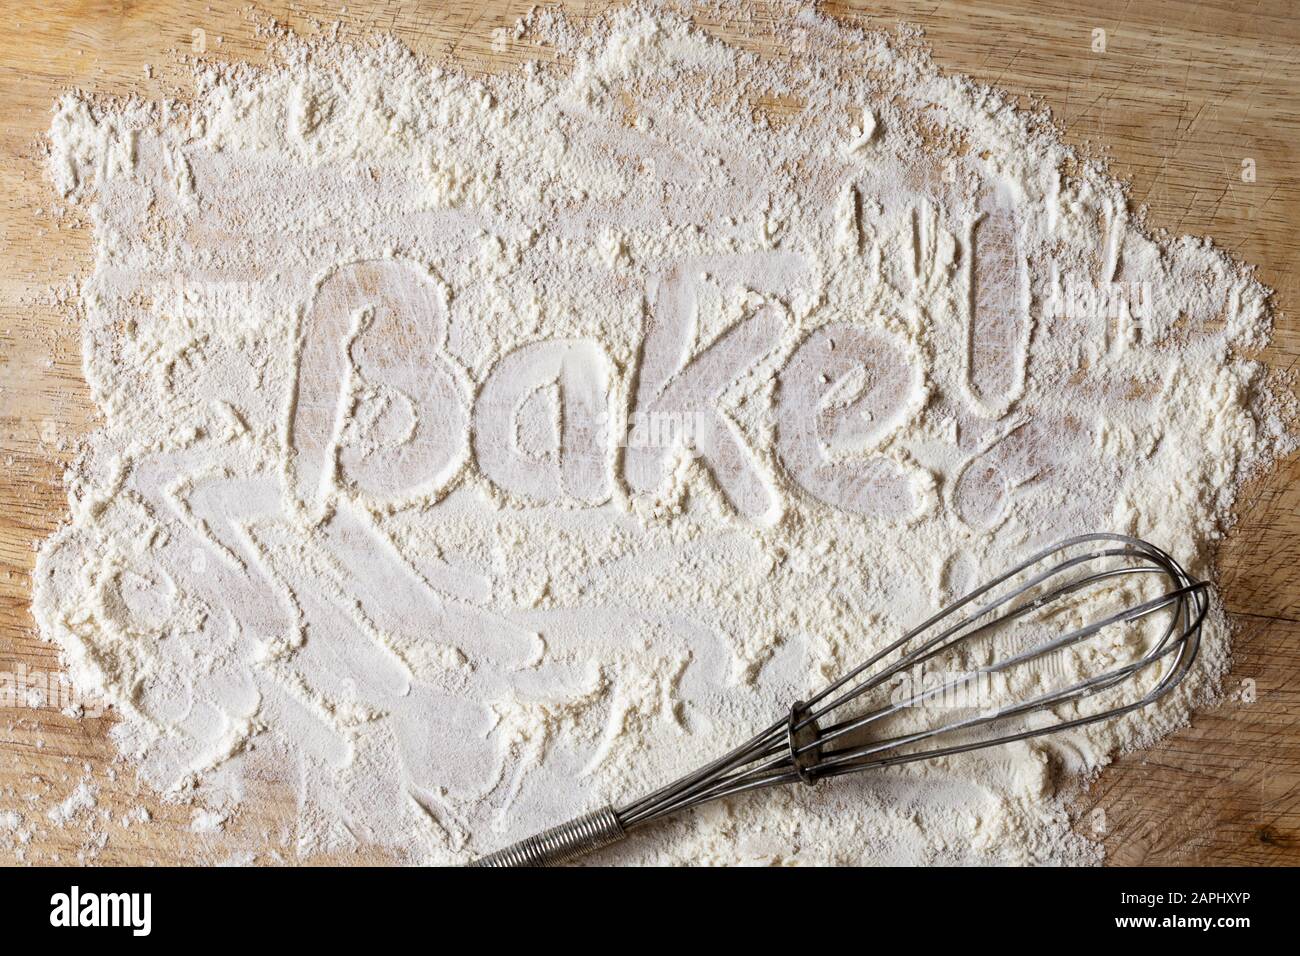 The word 'Bake!' written as an instruction in scattered flour via finger writing on wooden board with retro manual whisk below. Stock Photo